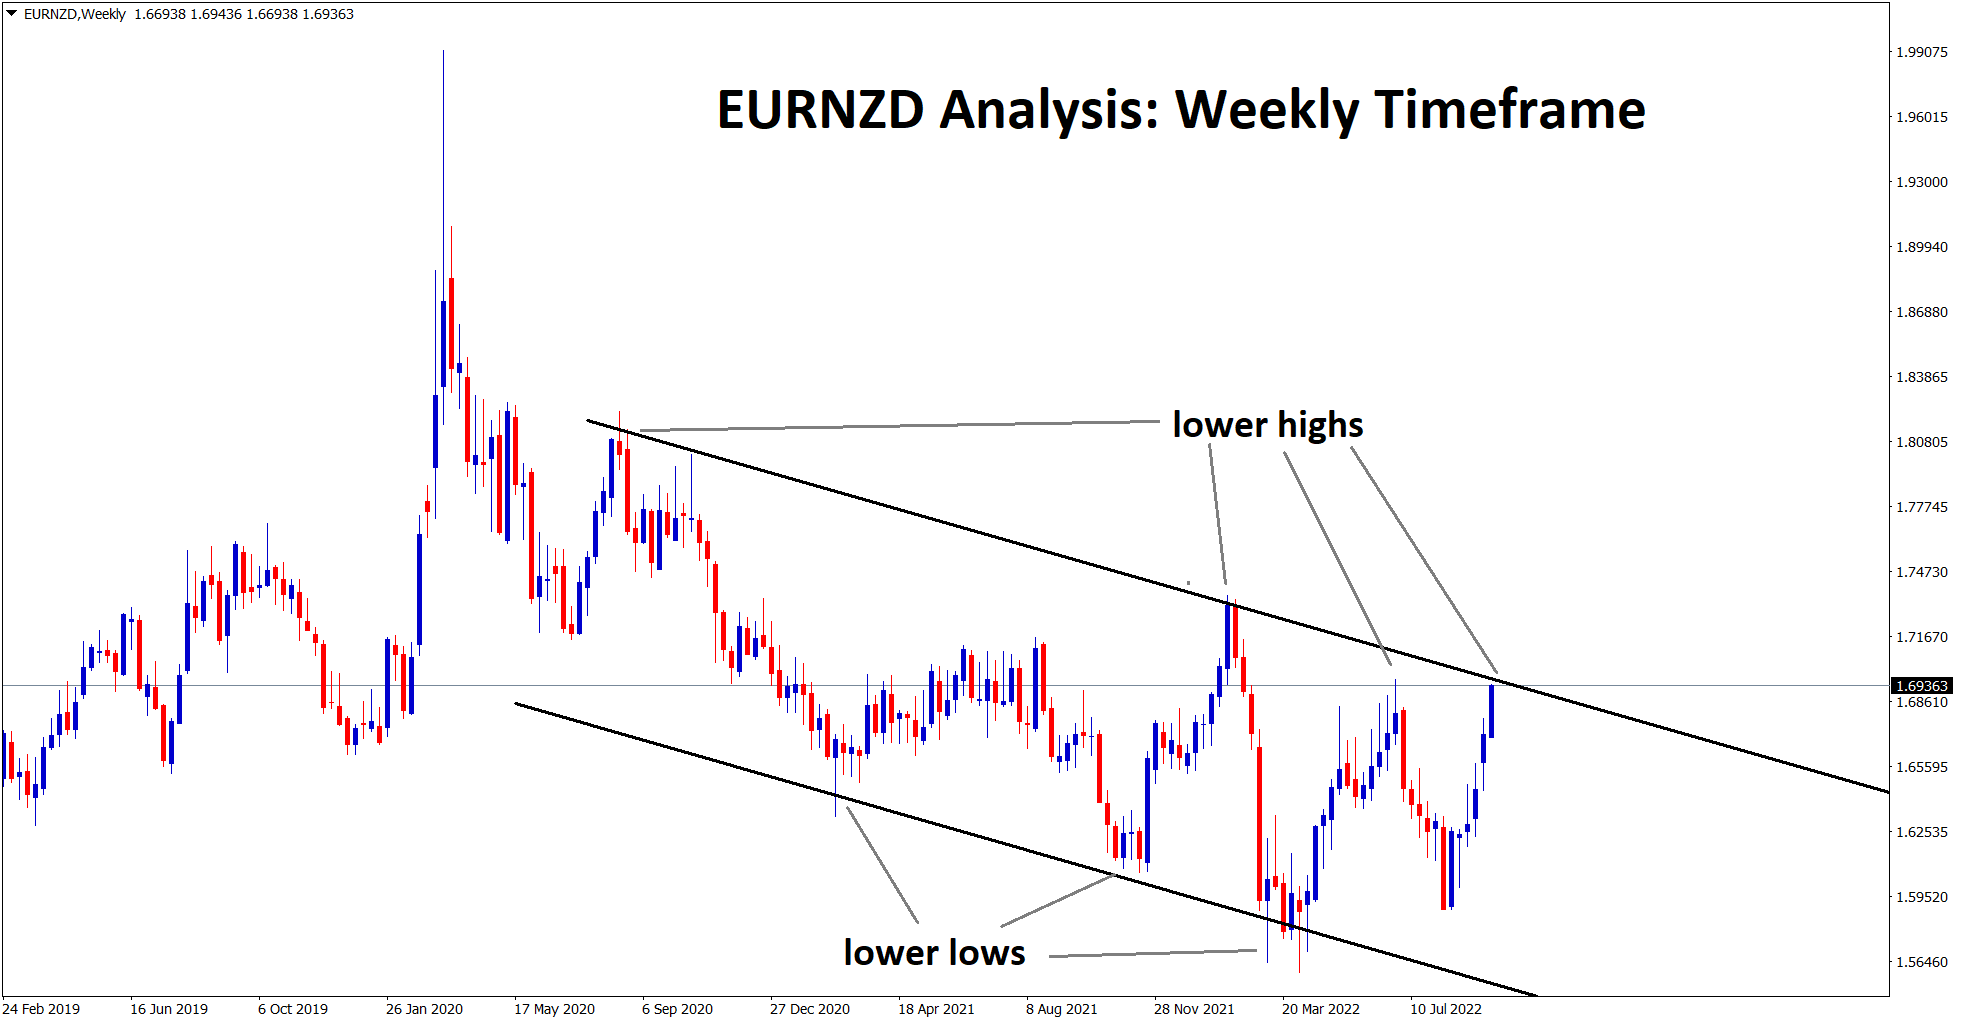 EURNZD at the lower high area of the downtrend line